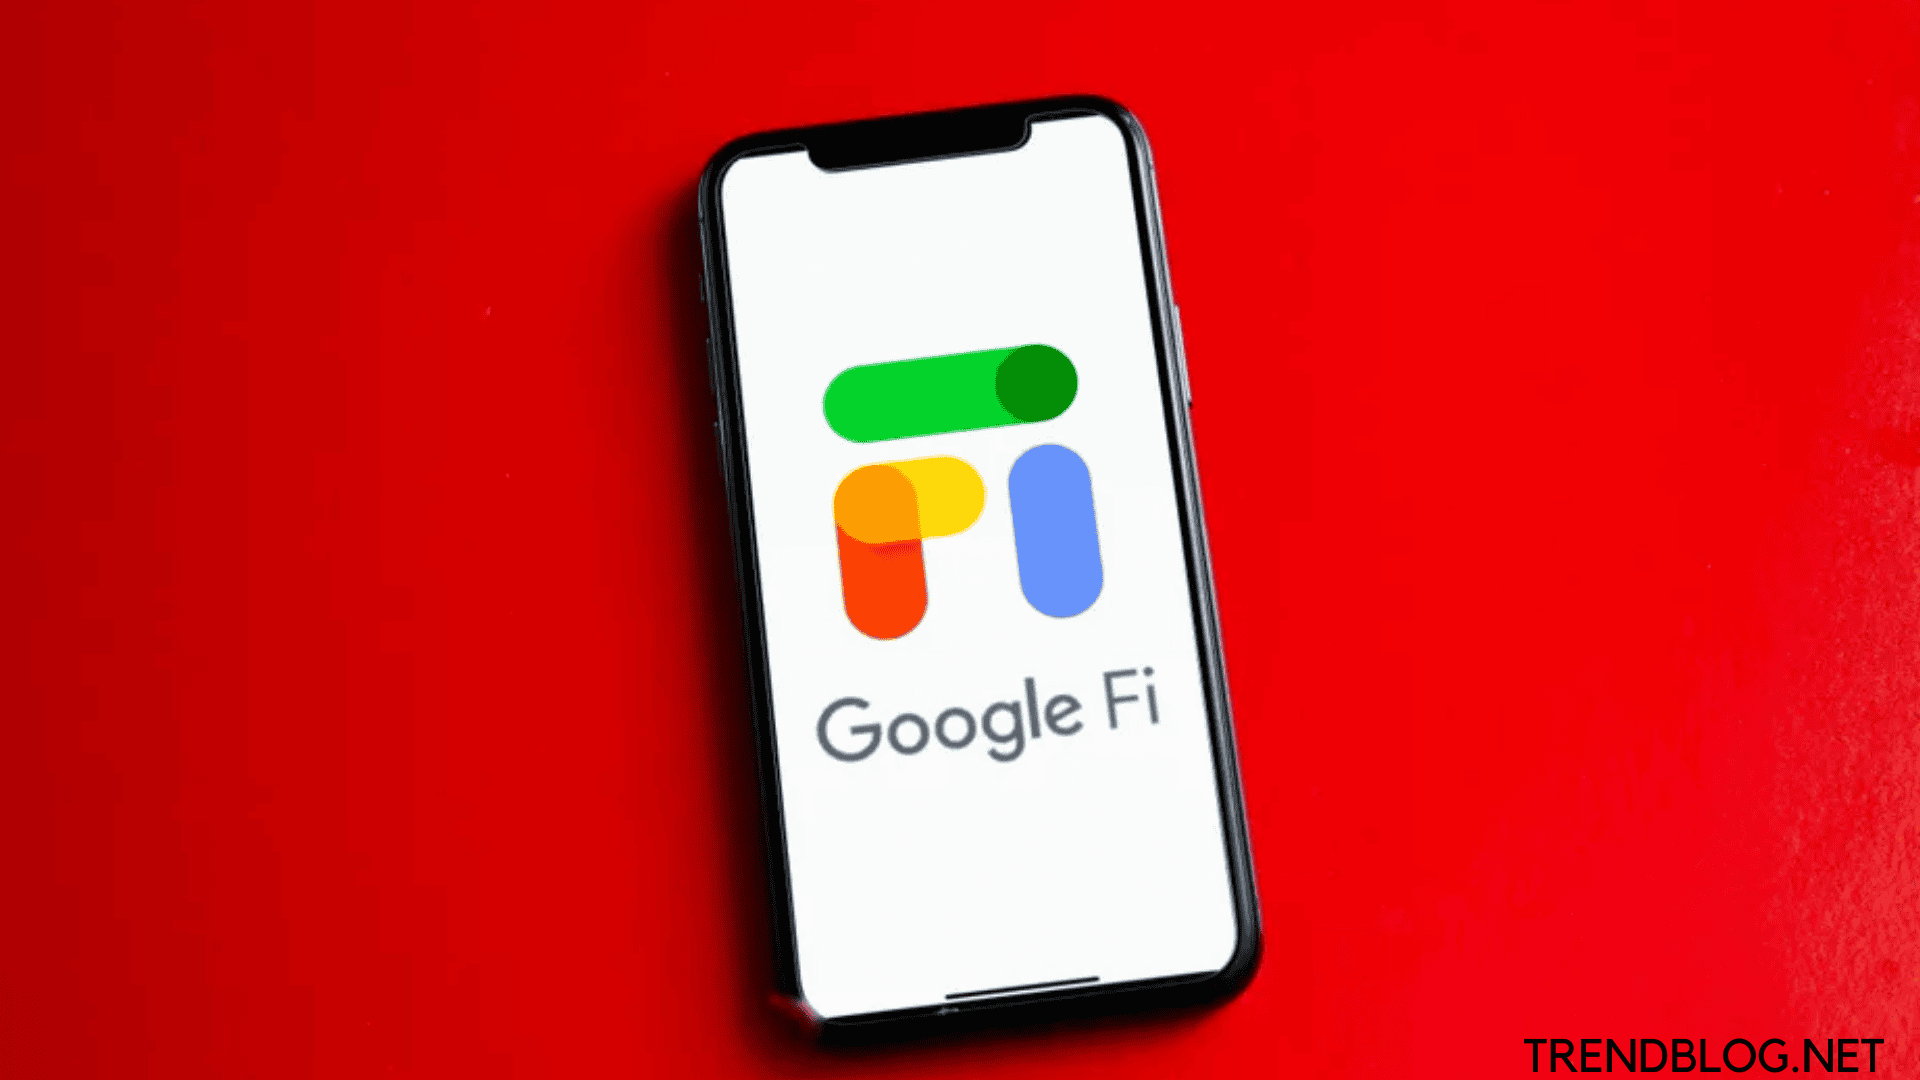  Google Fi Simply Unlimited and Monthly Plans: Limitless: Adaptable